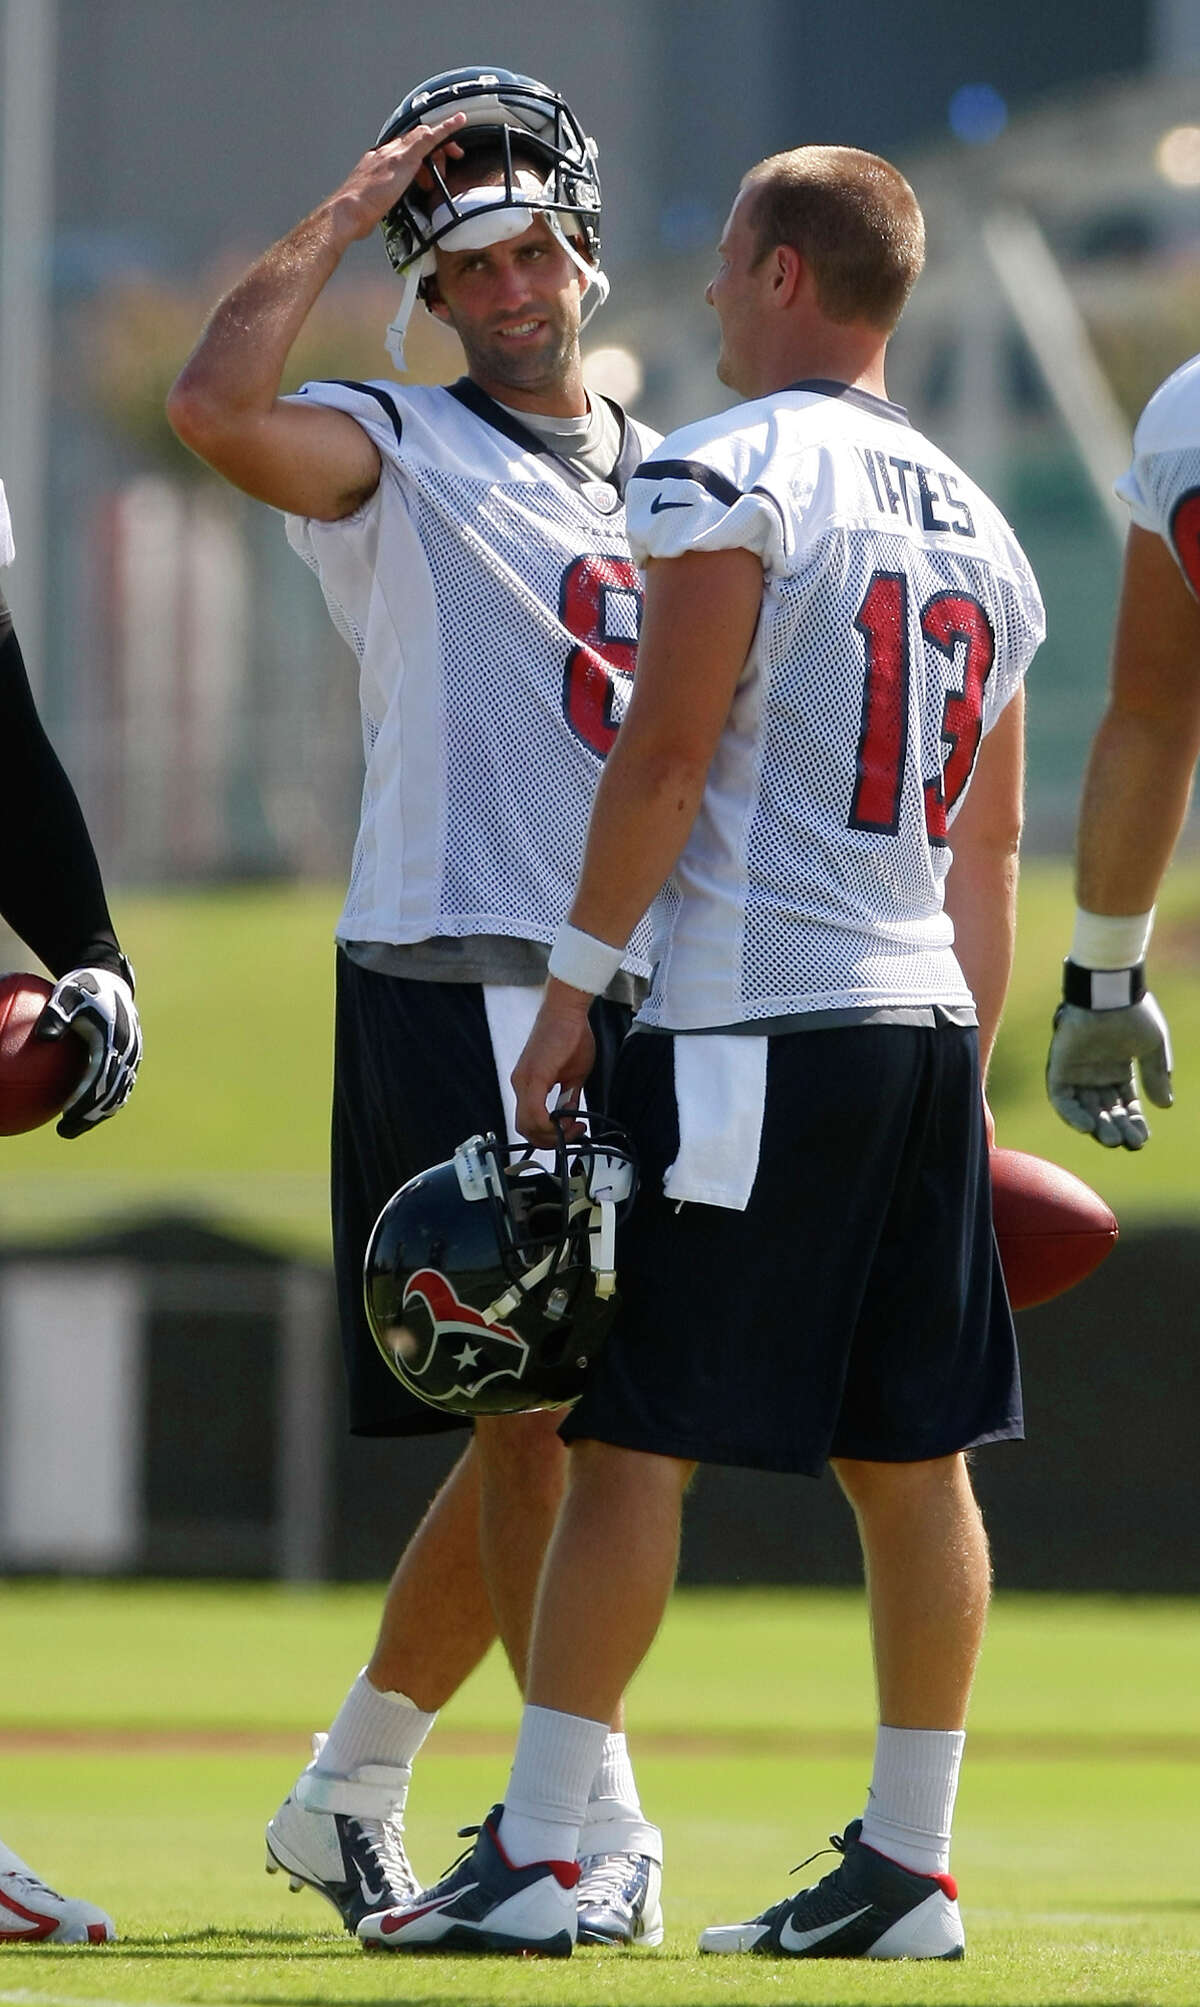 Texans quarterbacks Matt Schaub, left, and T.J. Yates will carry the load for the team in the final two games of what has been a disappointing season.